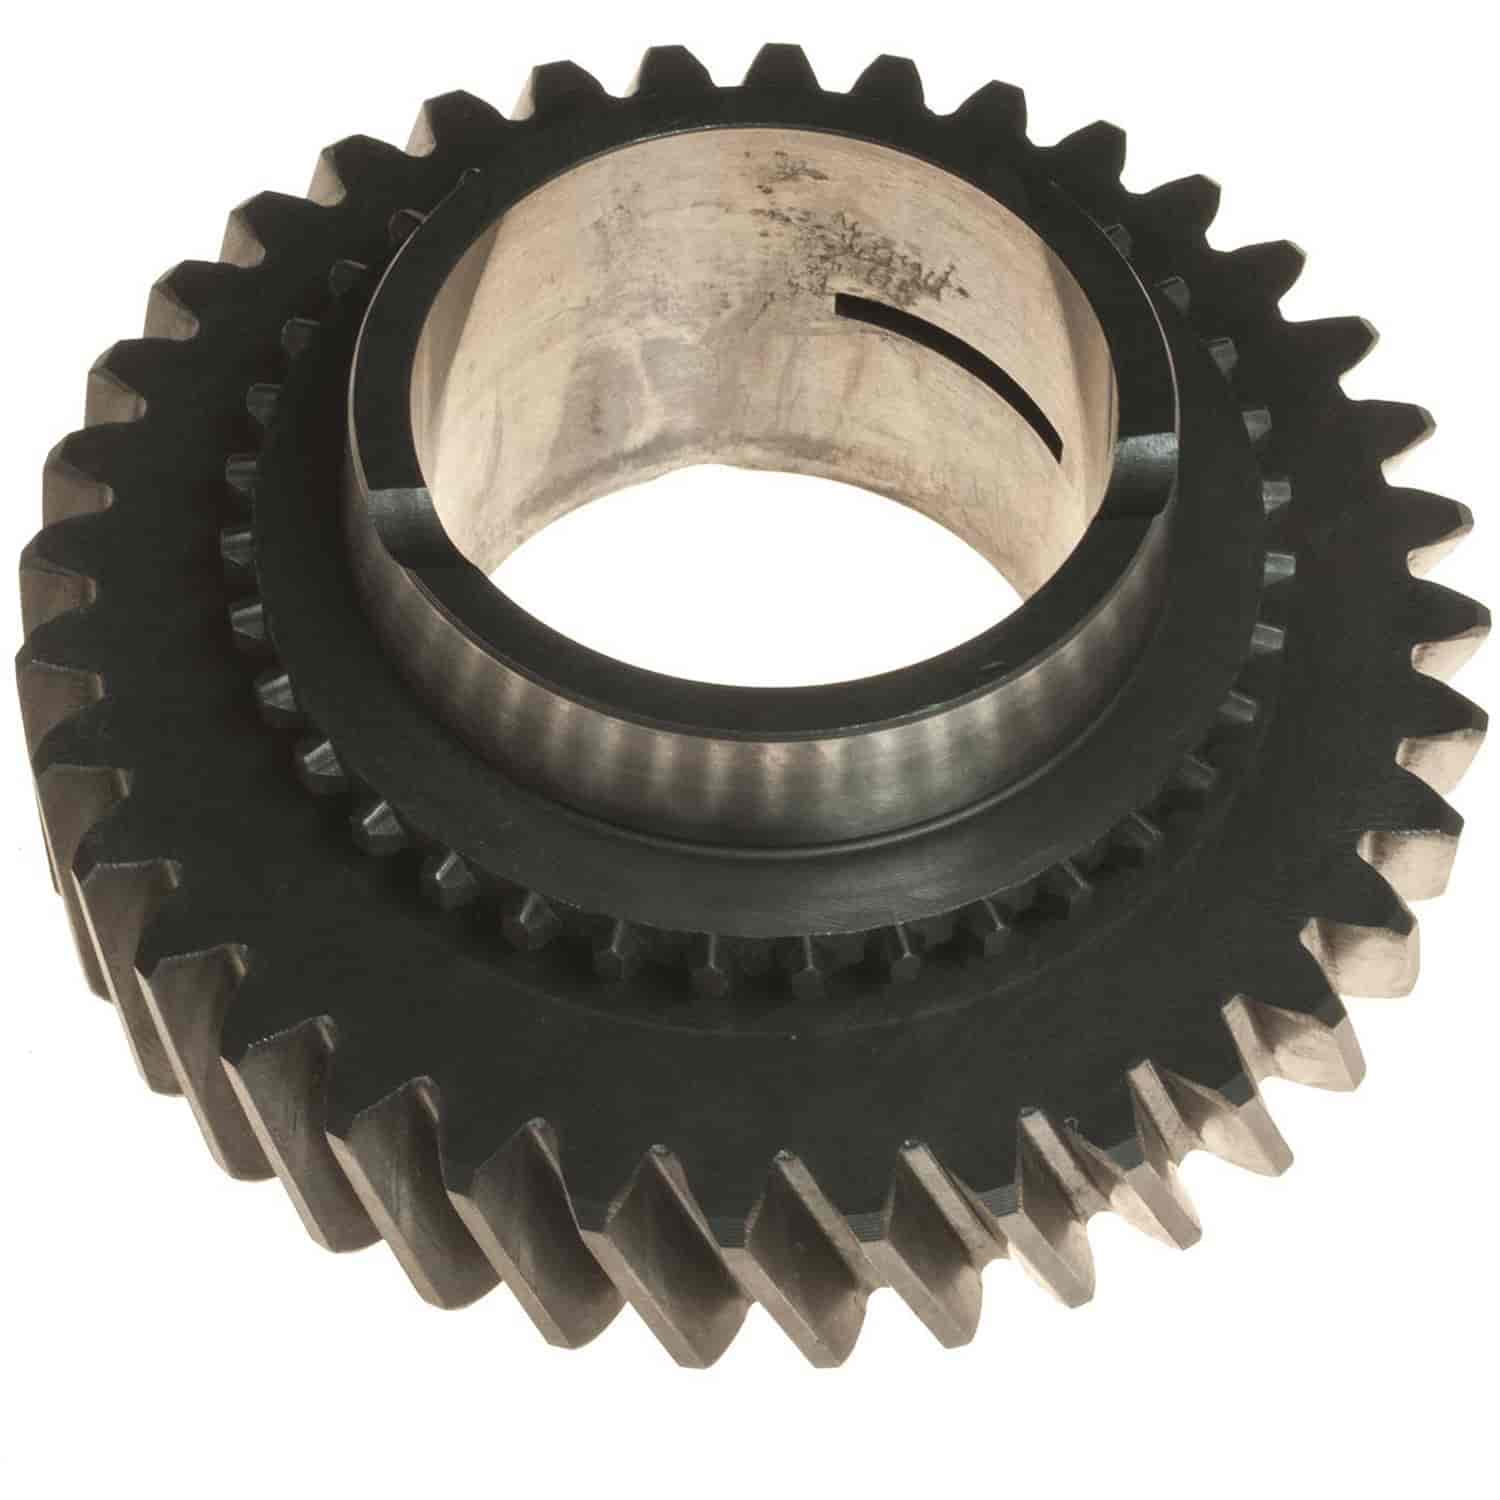 2nd & 3rd Gear Mainshaft 36/22 Tooth Count